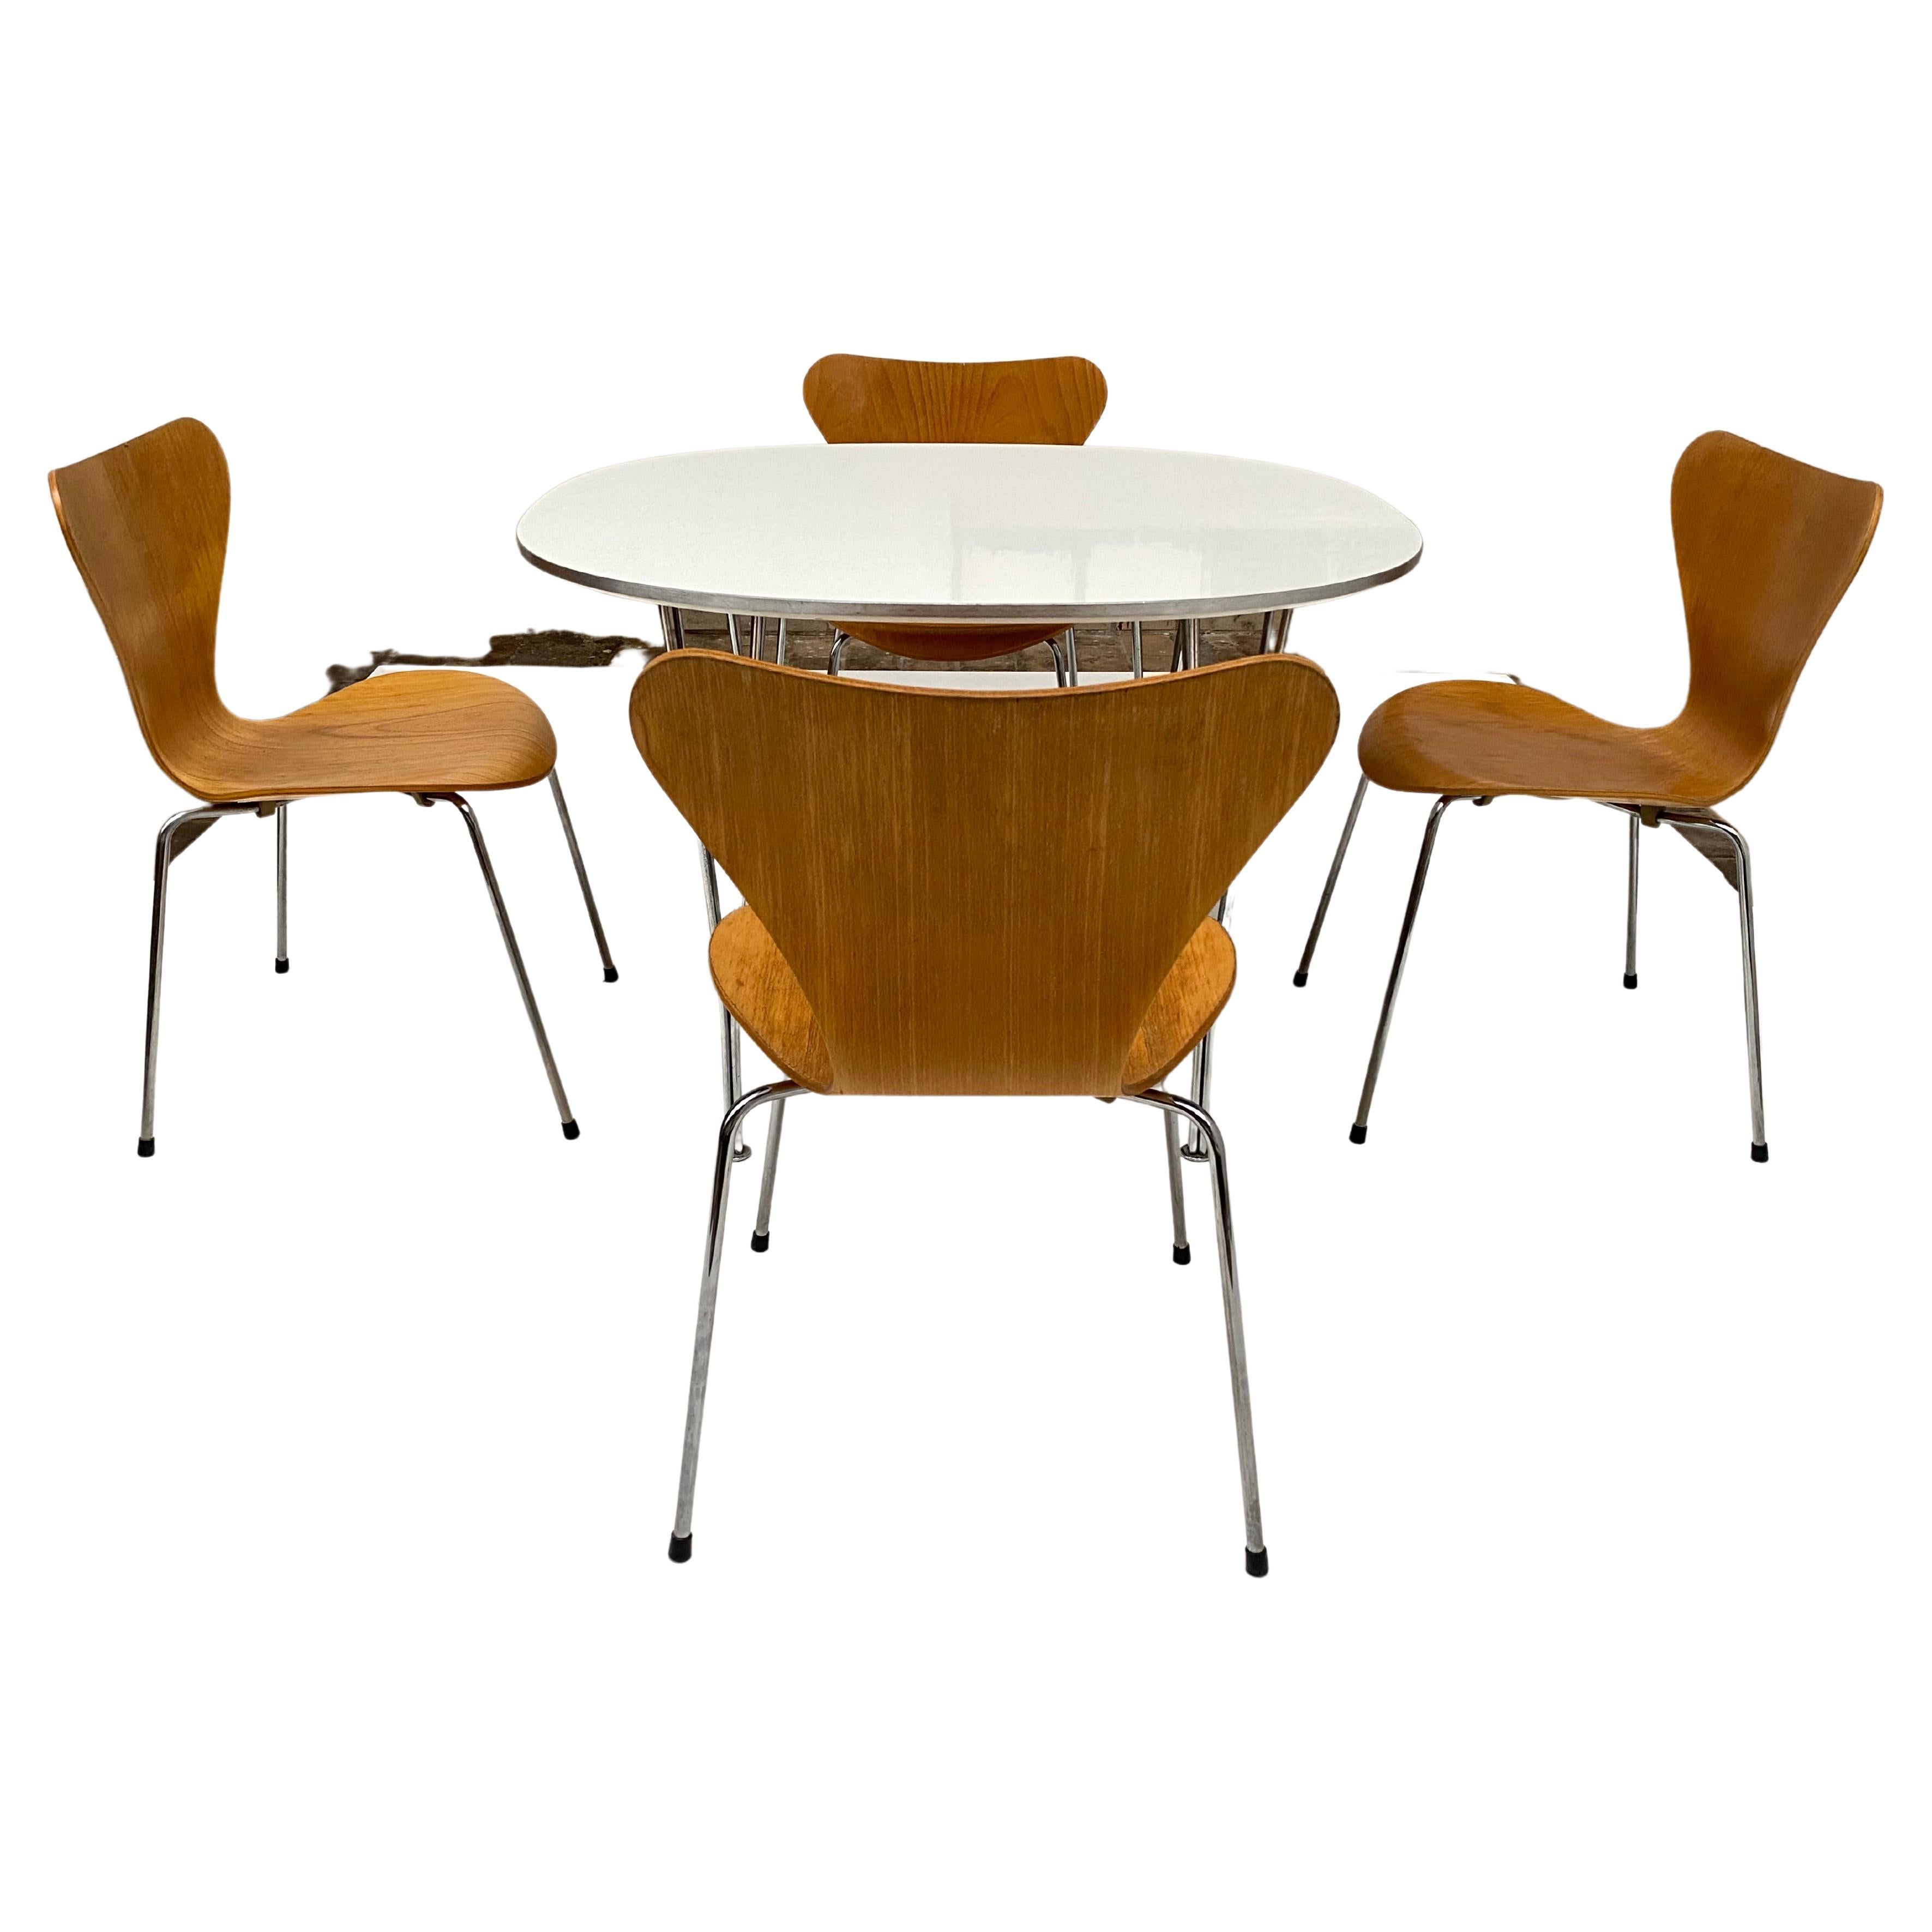 Nice matching dining set produced by Fritz Hansen in 1990

4 seven series 'butterfly' dining chair by Arno Jacobsen with a complementing dining table by Piet Hein & Bruno Mathsson for Fritz Hansen of Denmark

Produced in 1990 everlasting